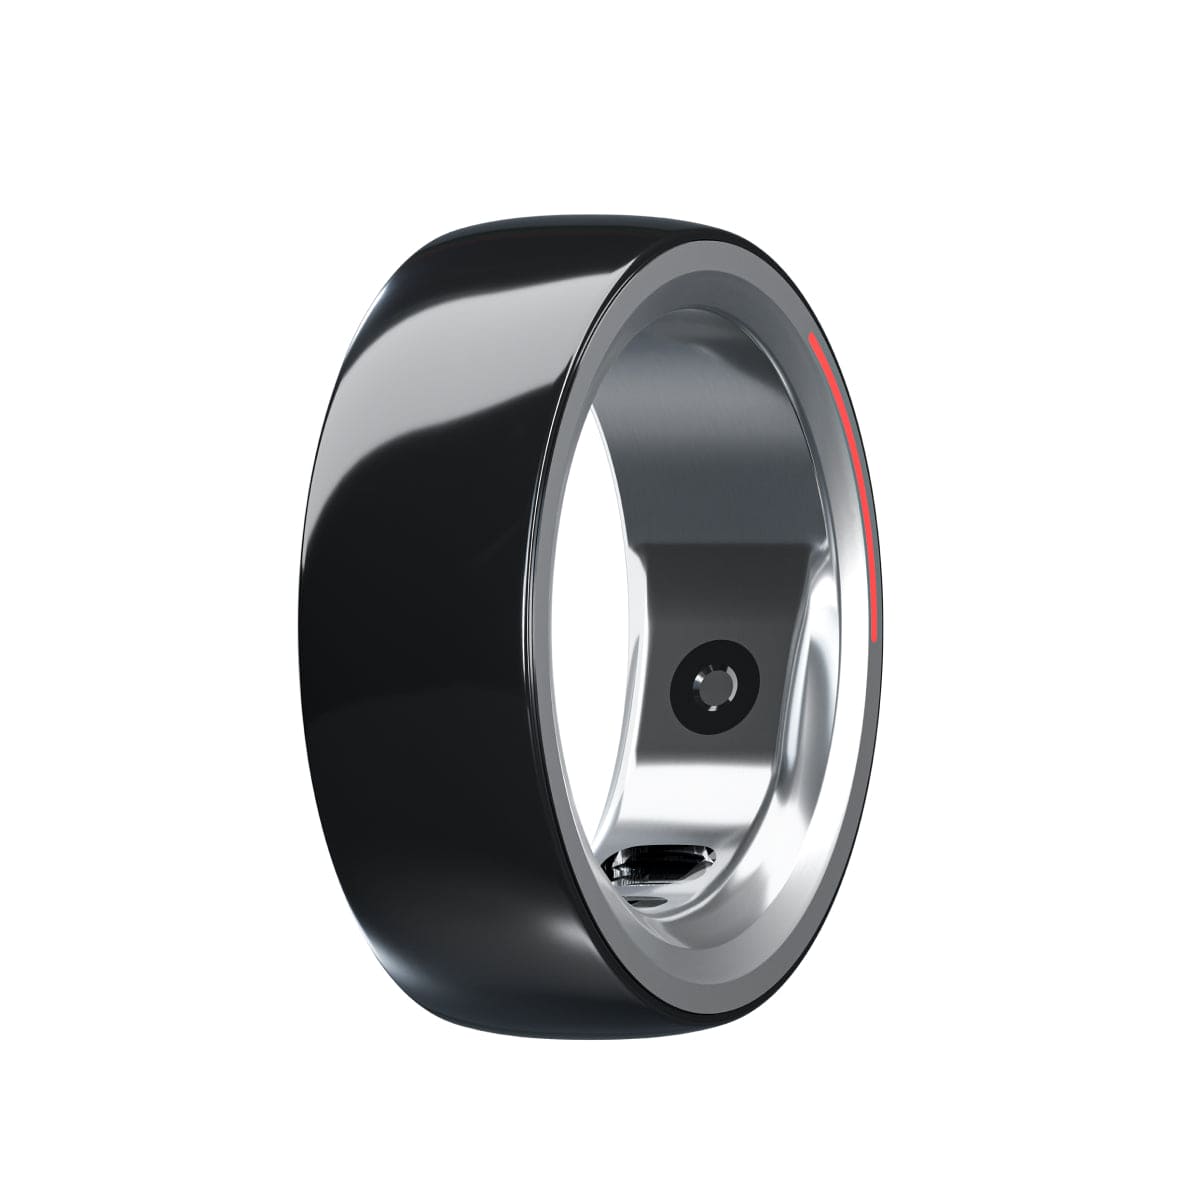 Halo Ring - A smart ring for health, fitness and sleep